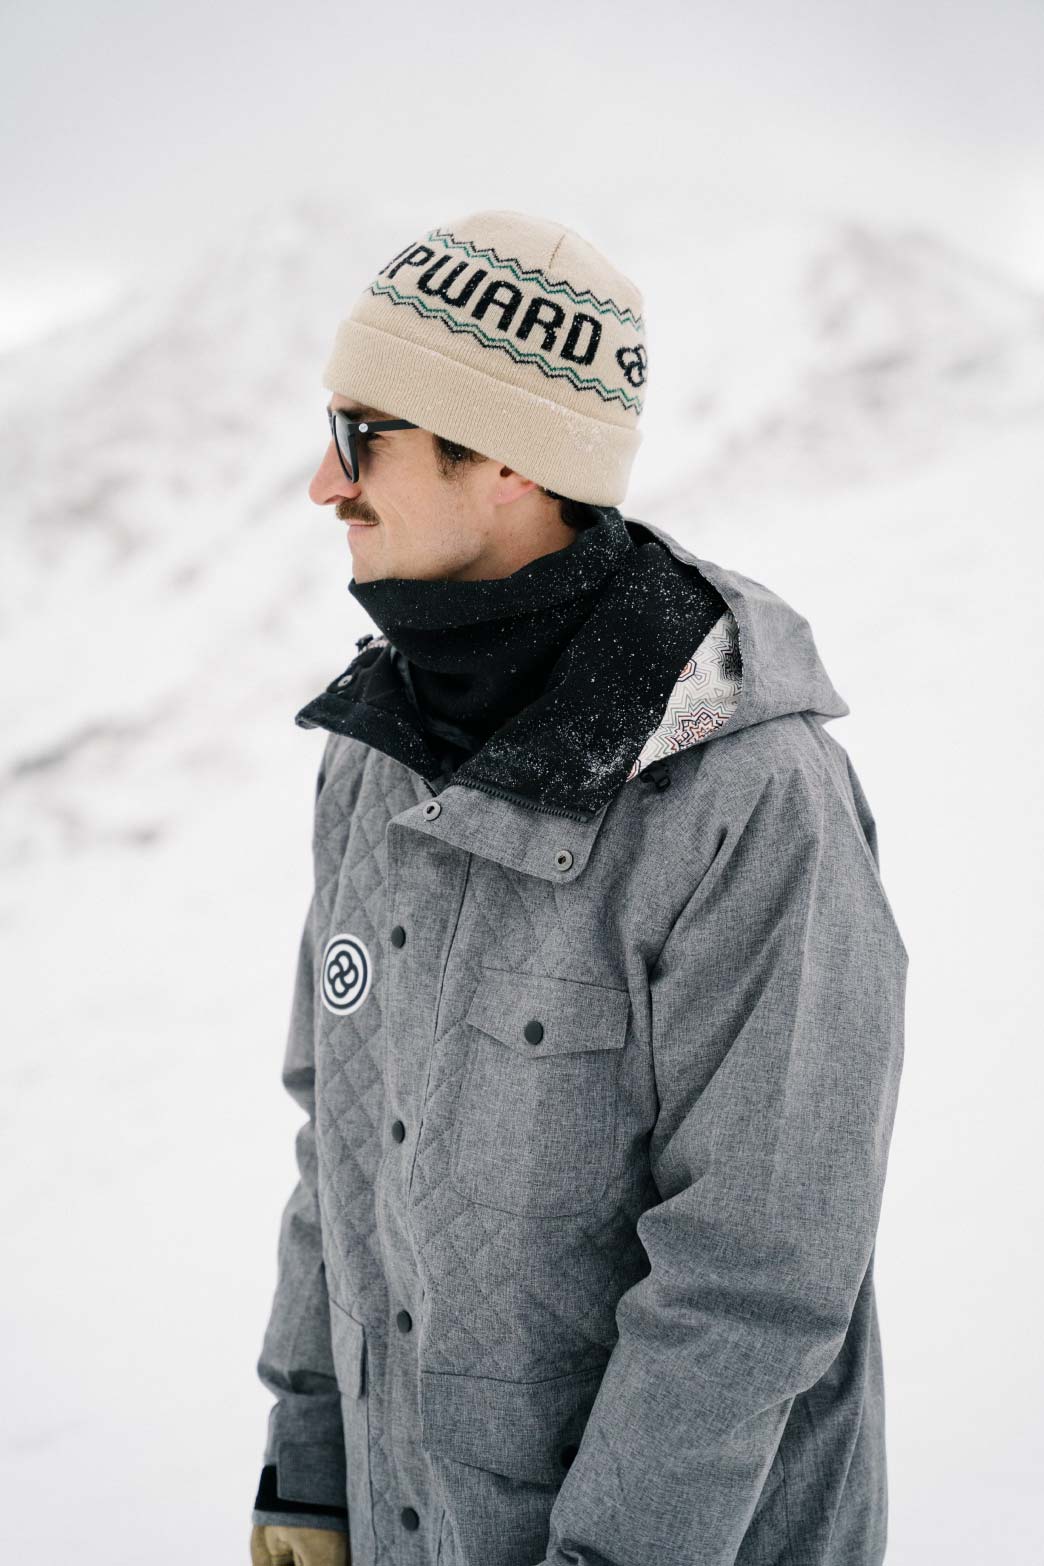 Cool Ski Outfits by Bloom Outerwear 